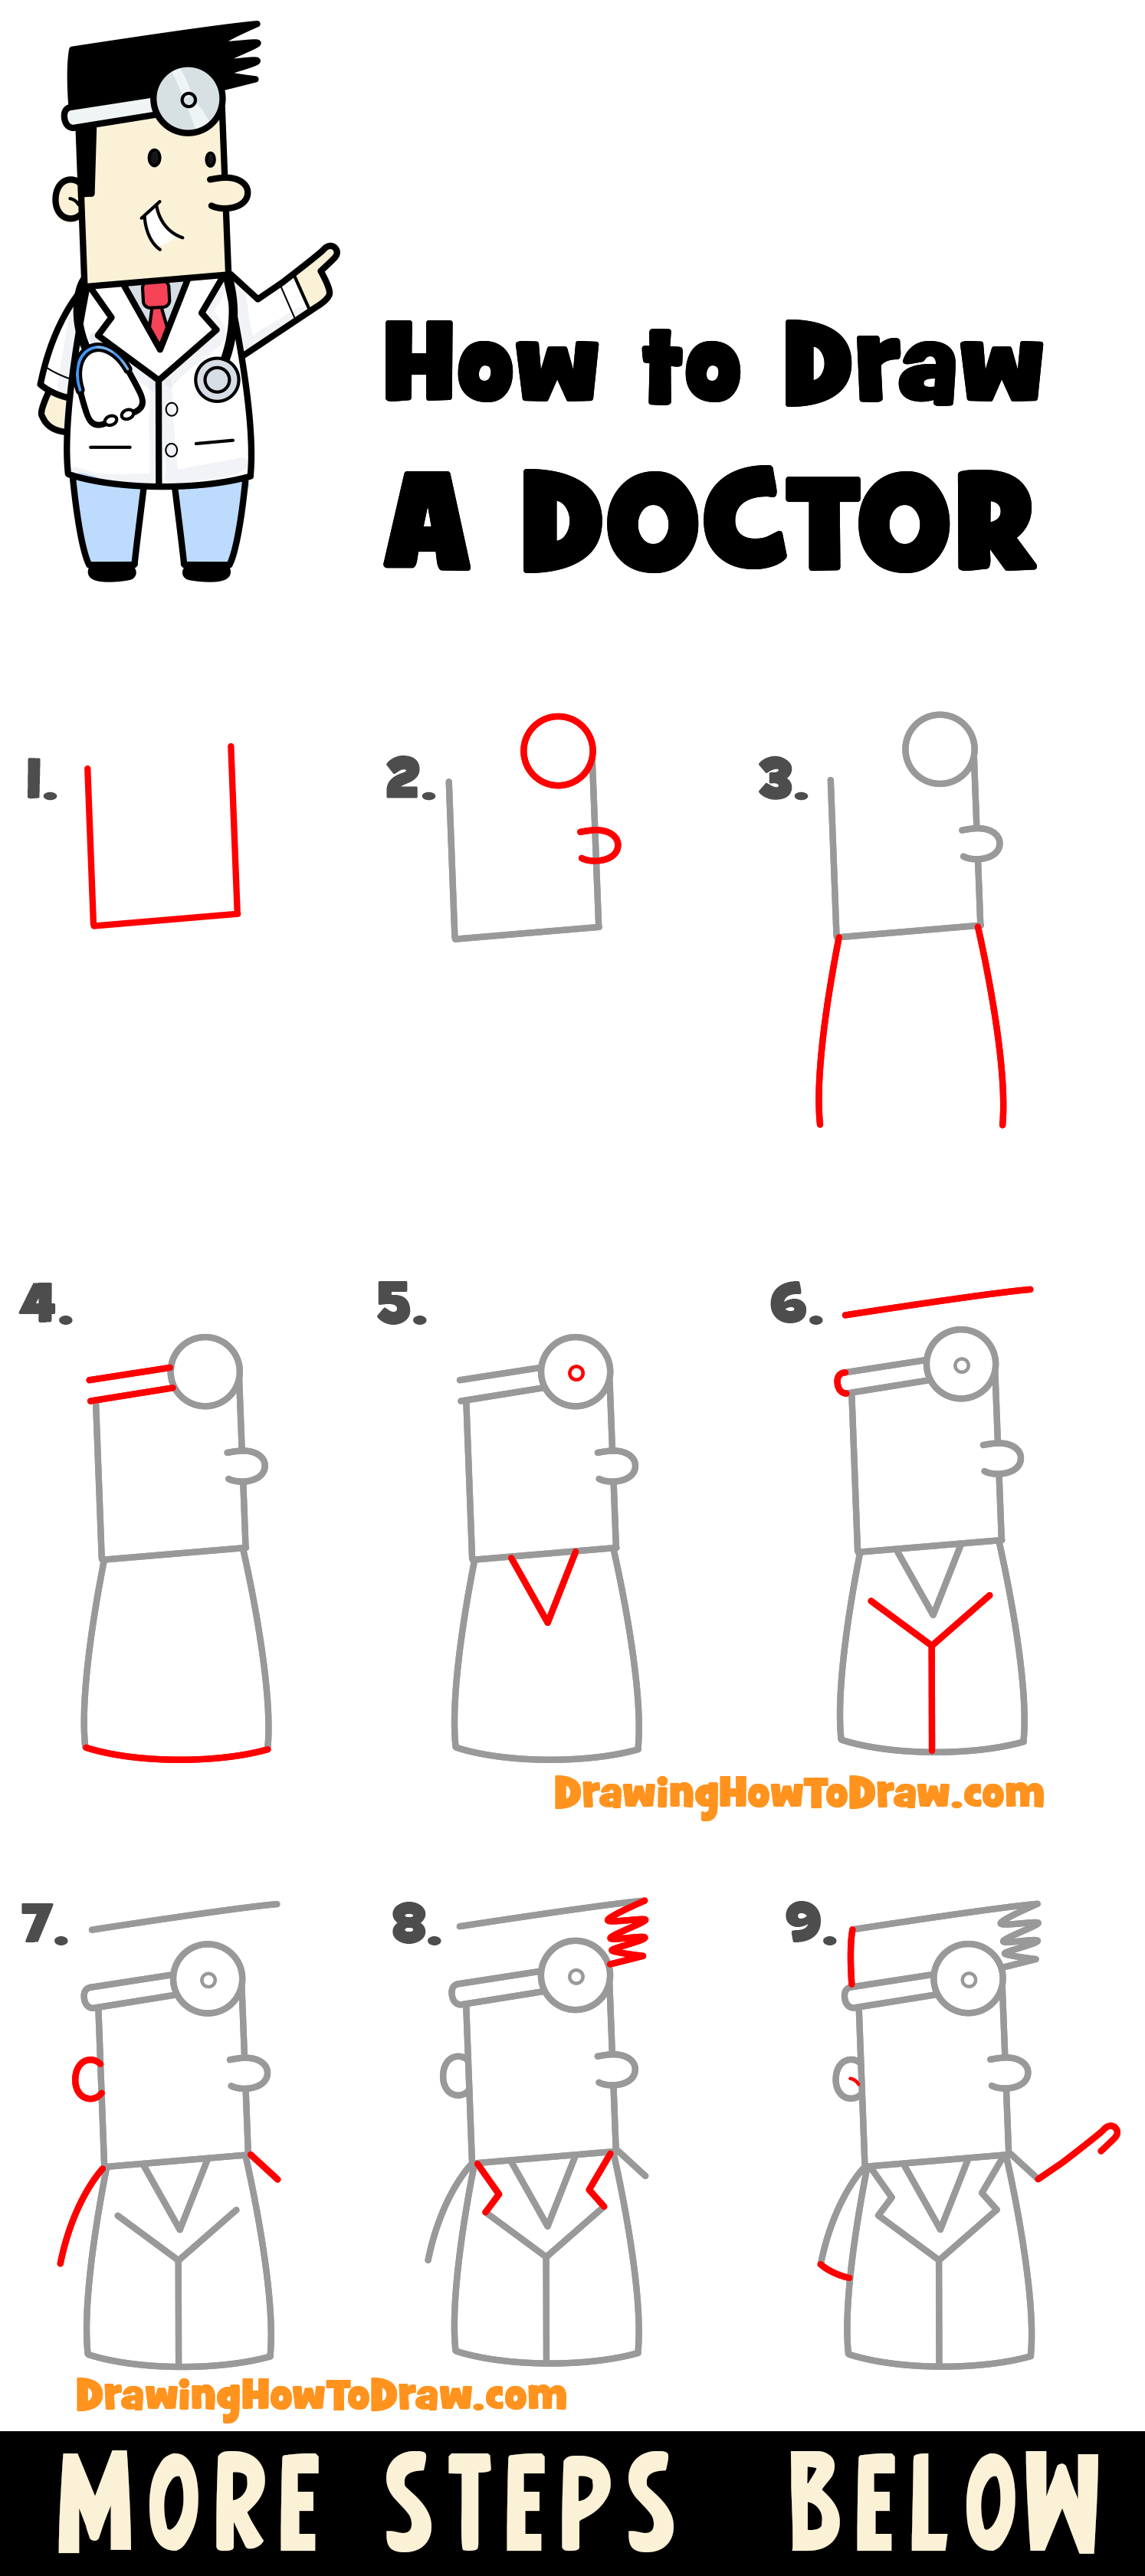 How to Draw a Stethoscope | A Step-by-Step Tutorial for Kids